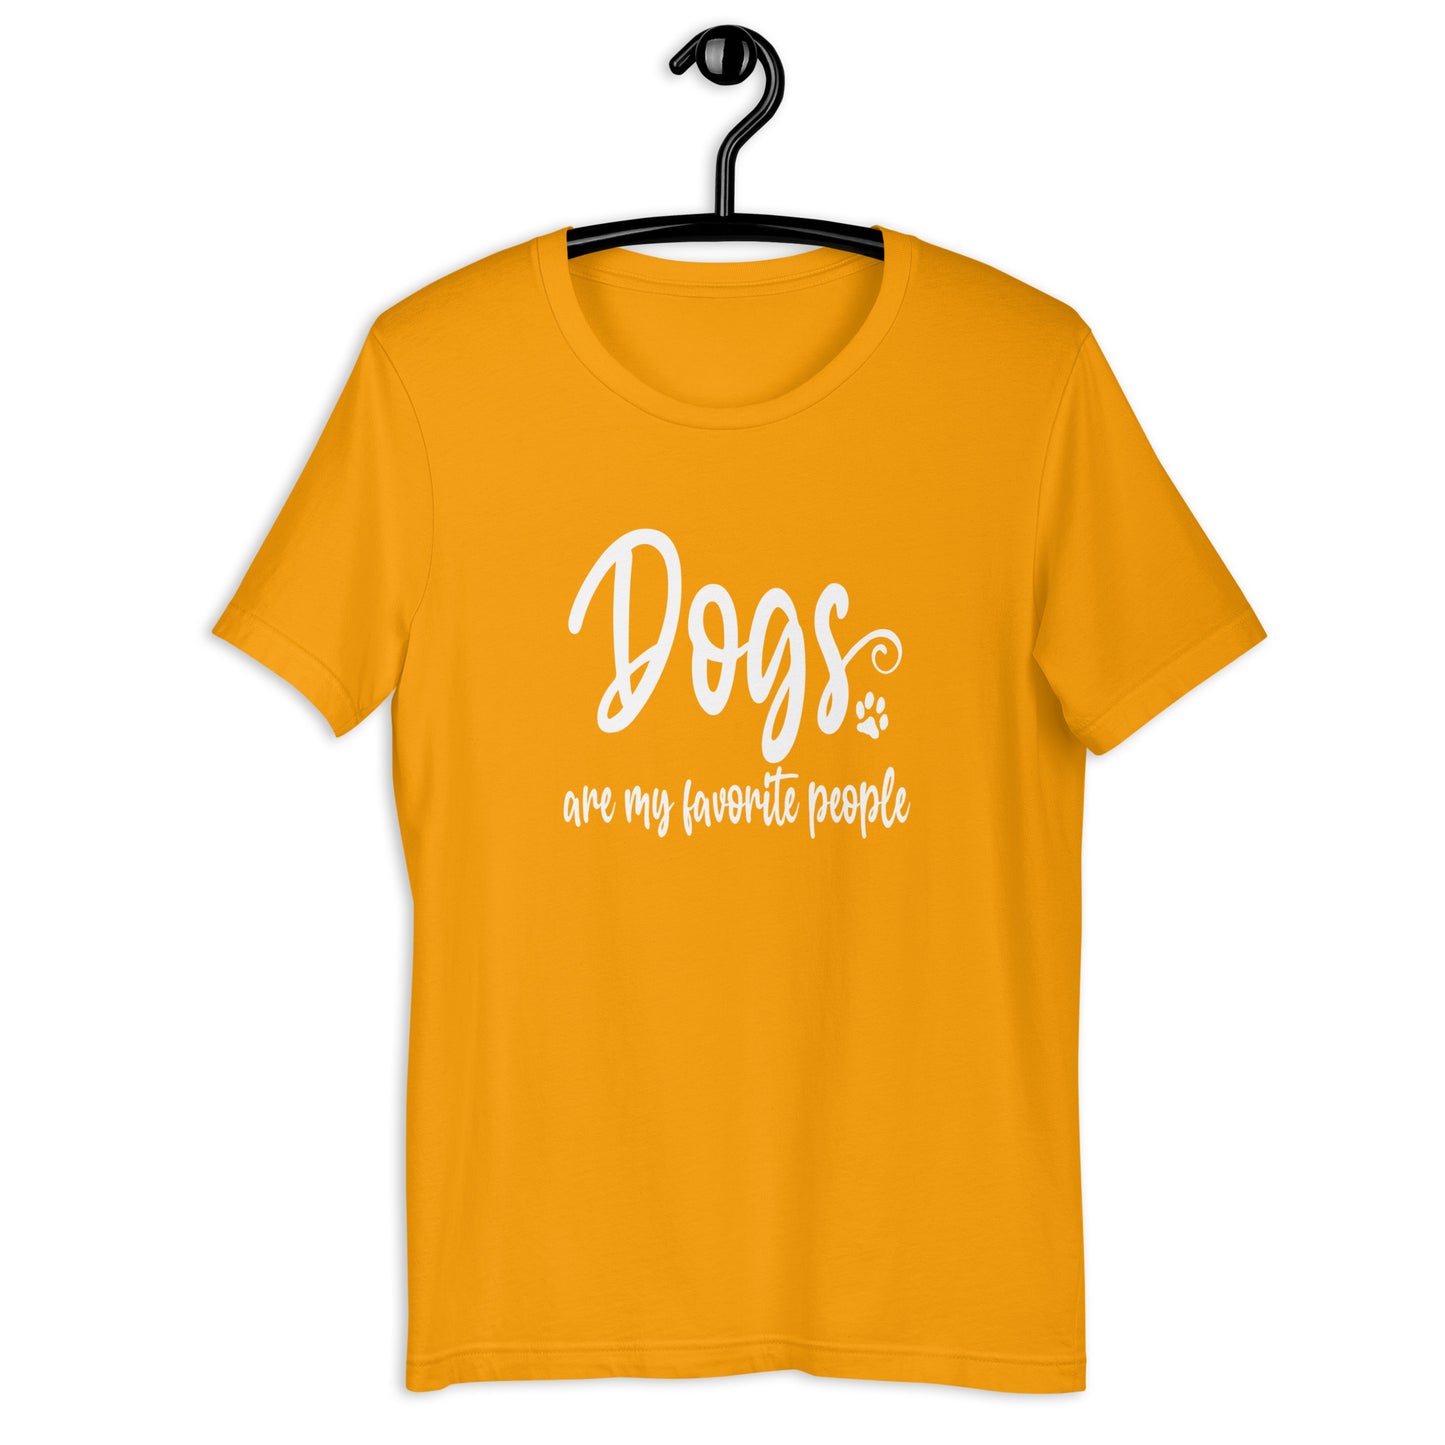 DOGS ARE MY FAVORITE PEOPLE - Unisex t-shirt